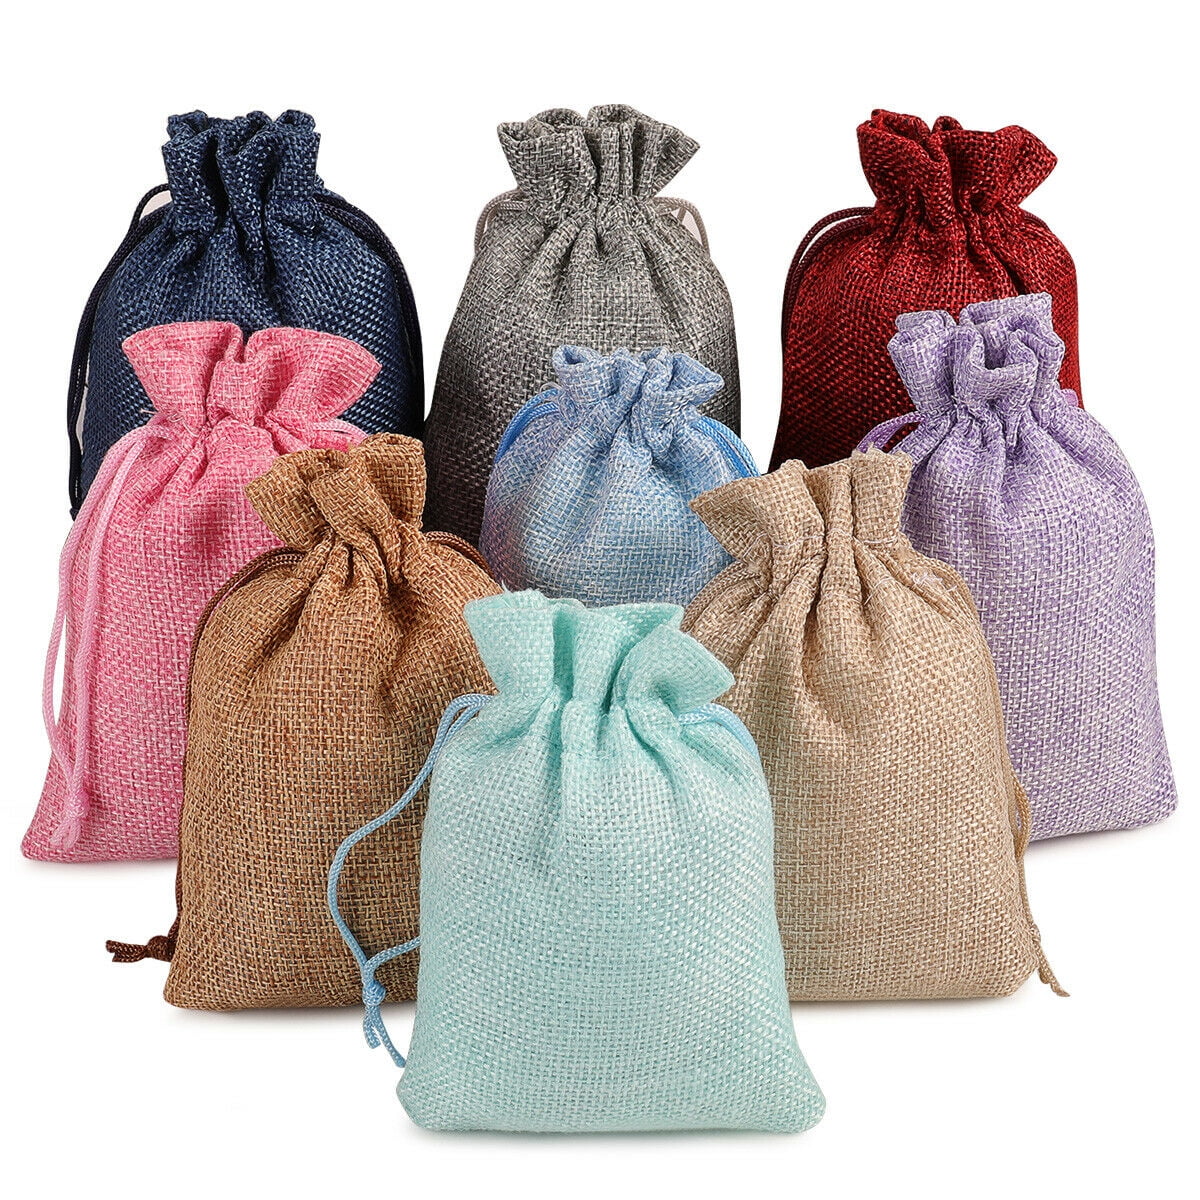 15 BURLAP JUTE SACKS WITH DRAWSTRINGS 6" BY 10" WEDDING PARTY FAVOR GIFT BAGS 